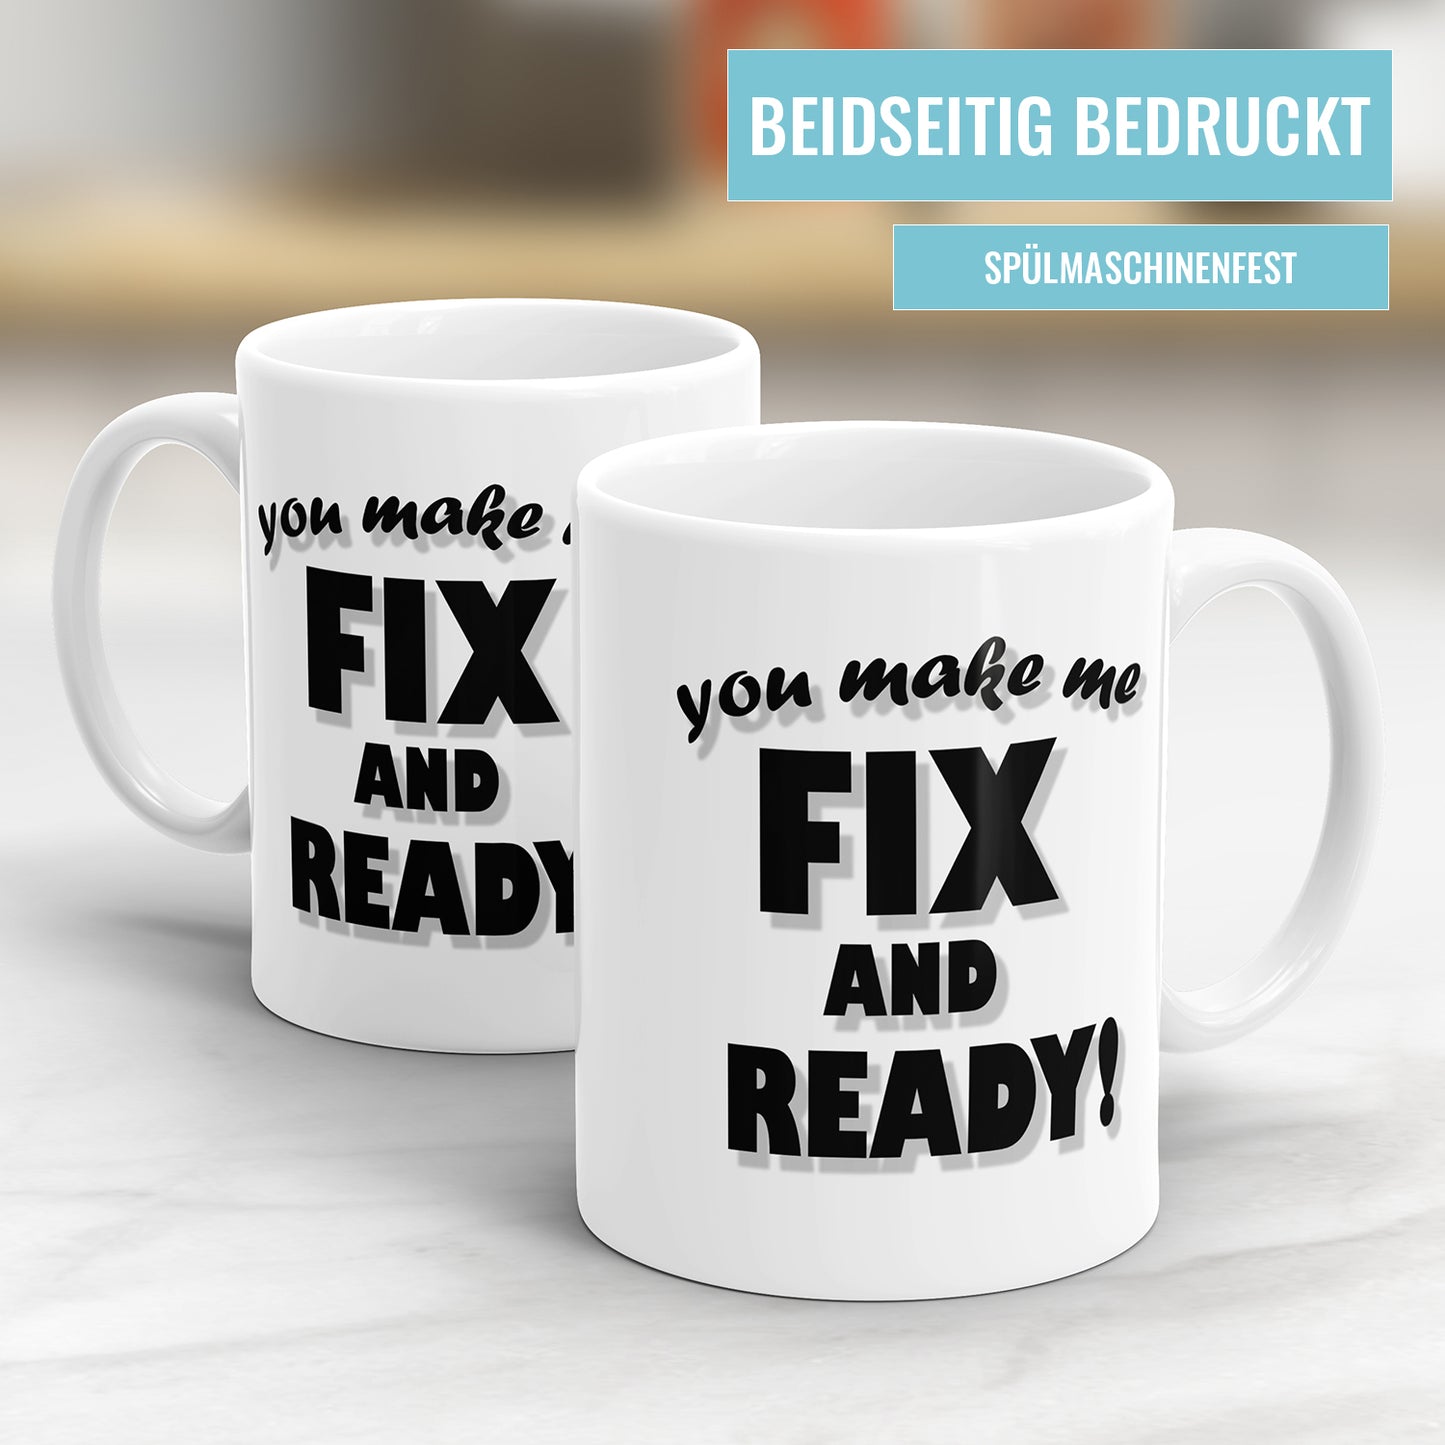 You Make me Fix And Ready Tasse mit Spruch Denglish Fulima